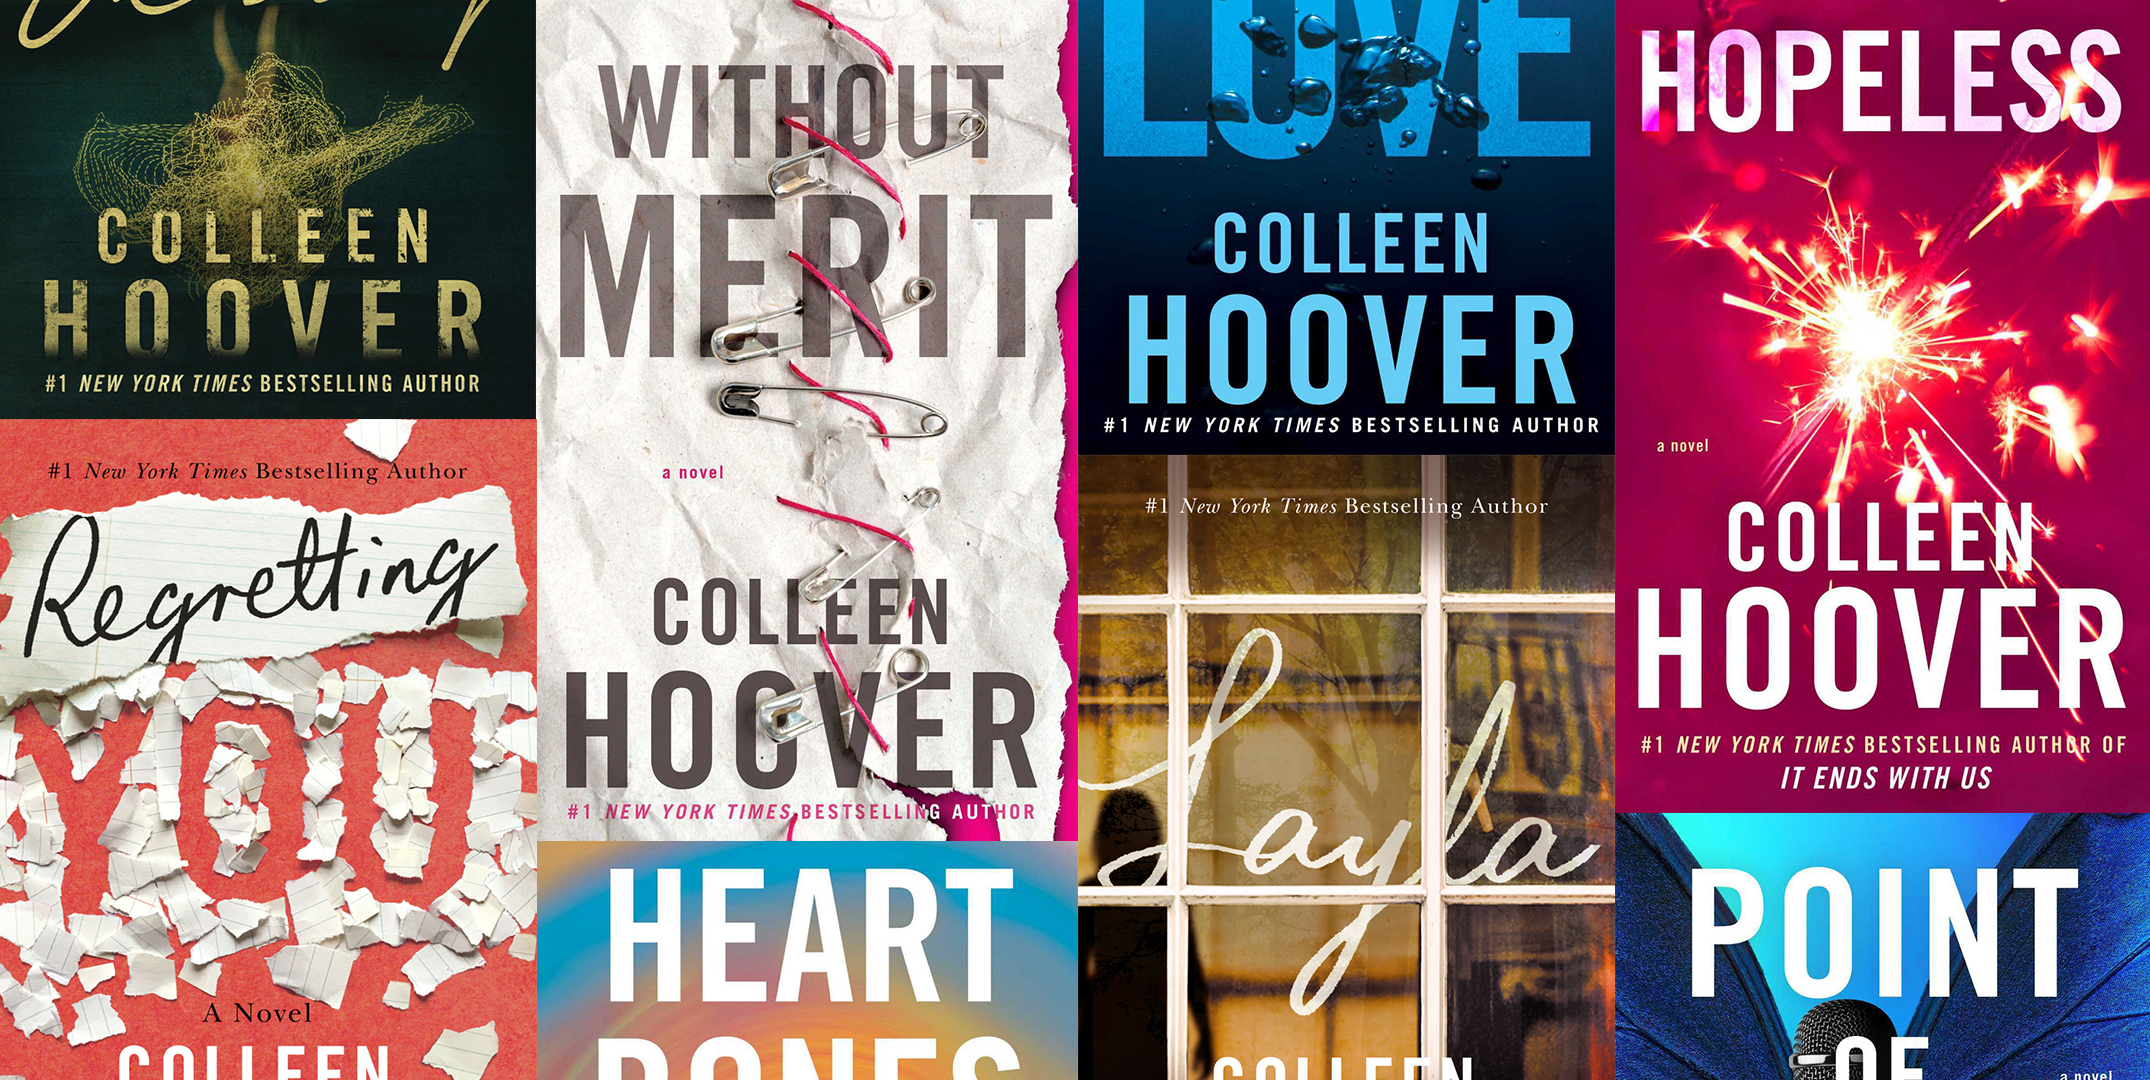 3 Books Collection Set (November 9, Ugly Love, It Ends with Us)